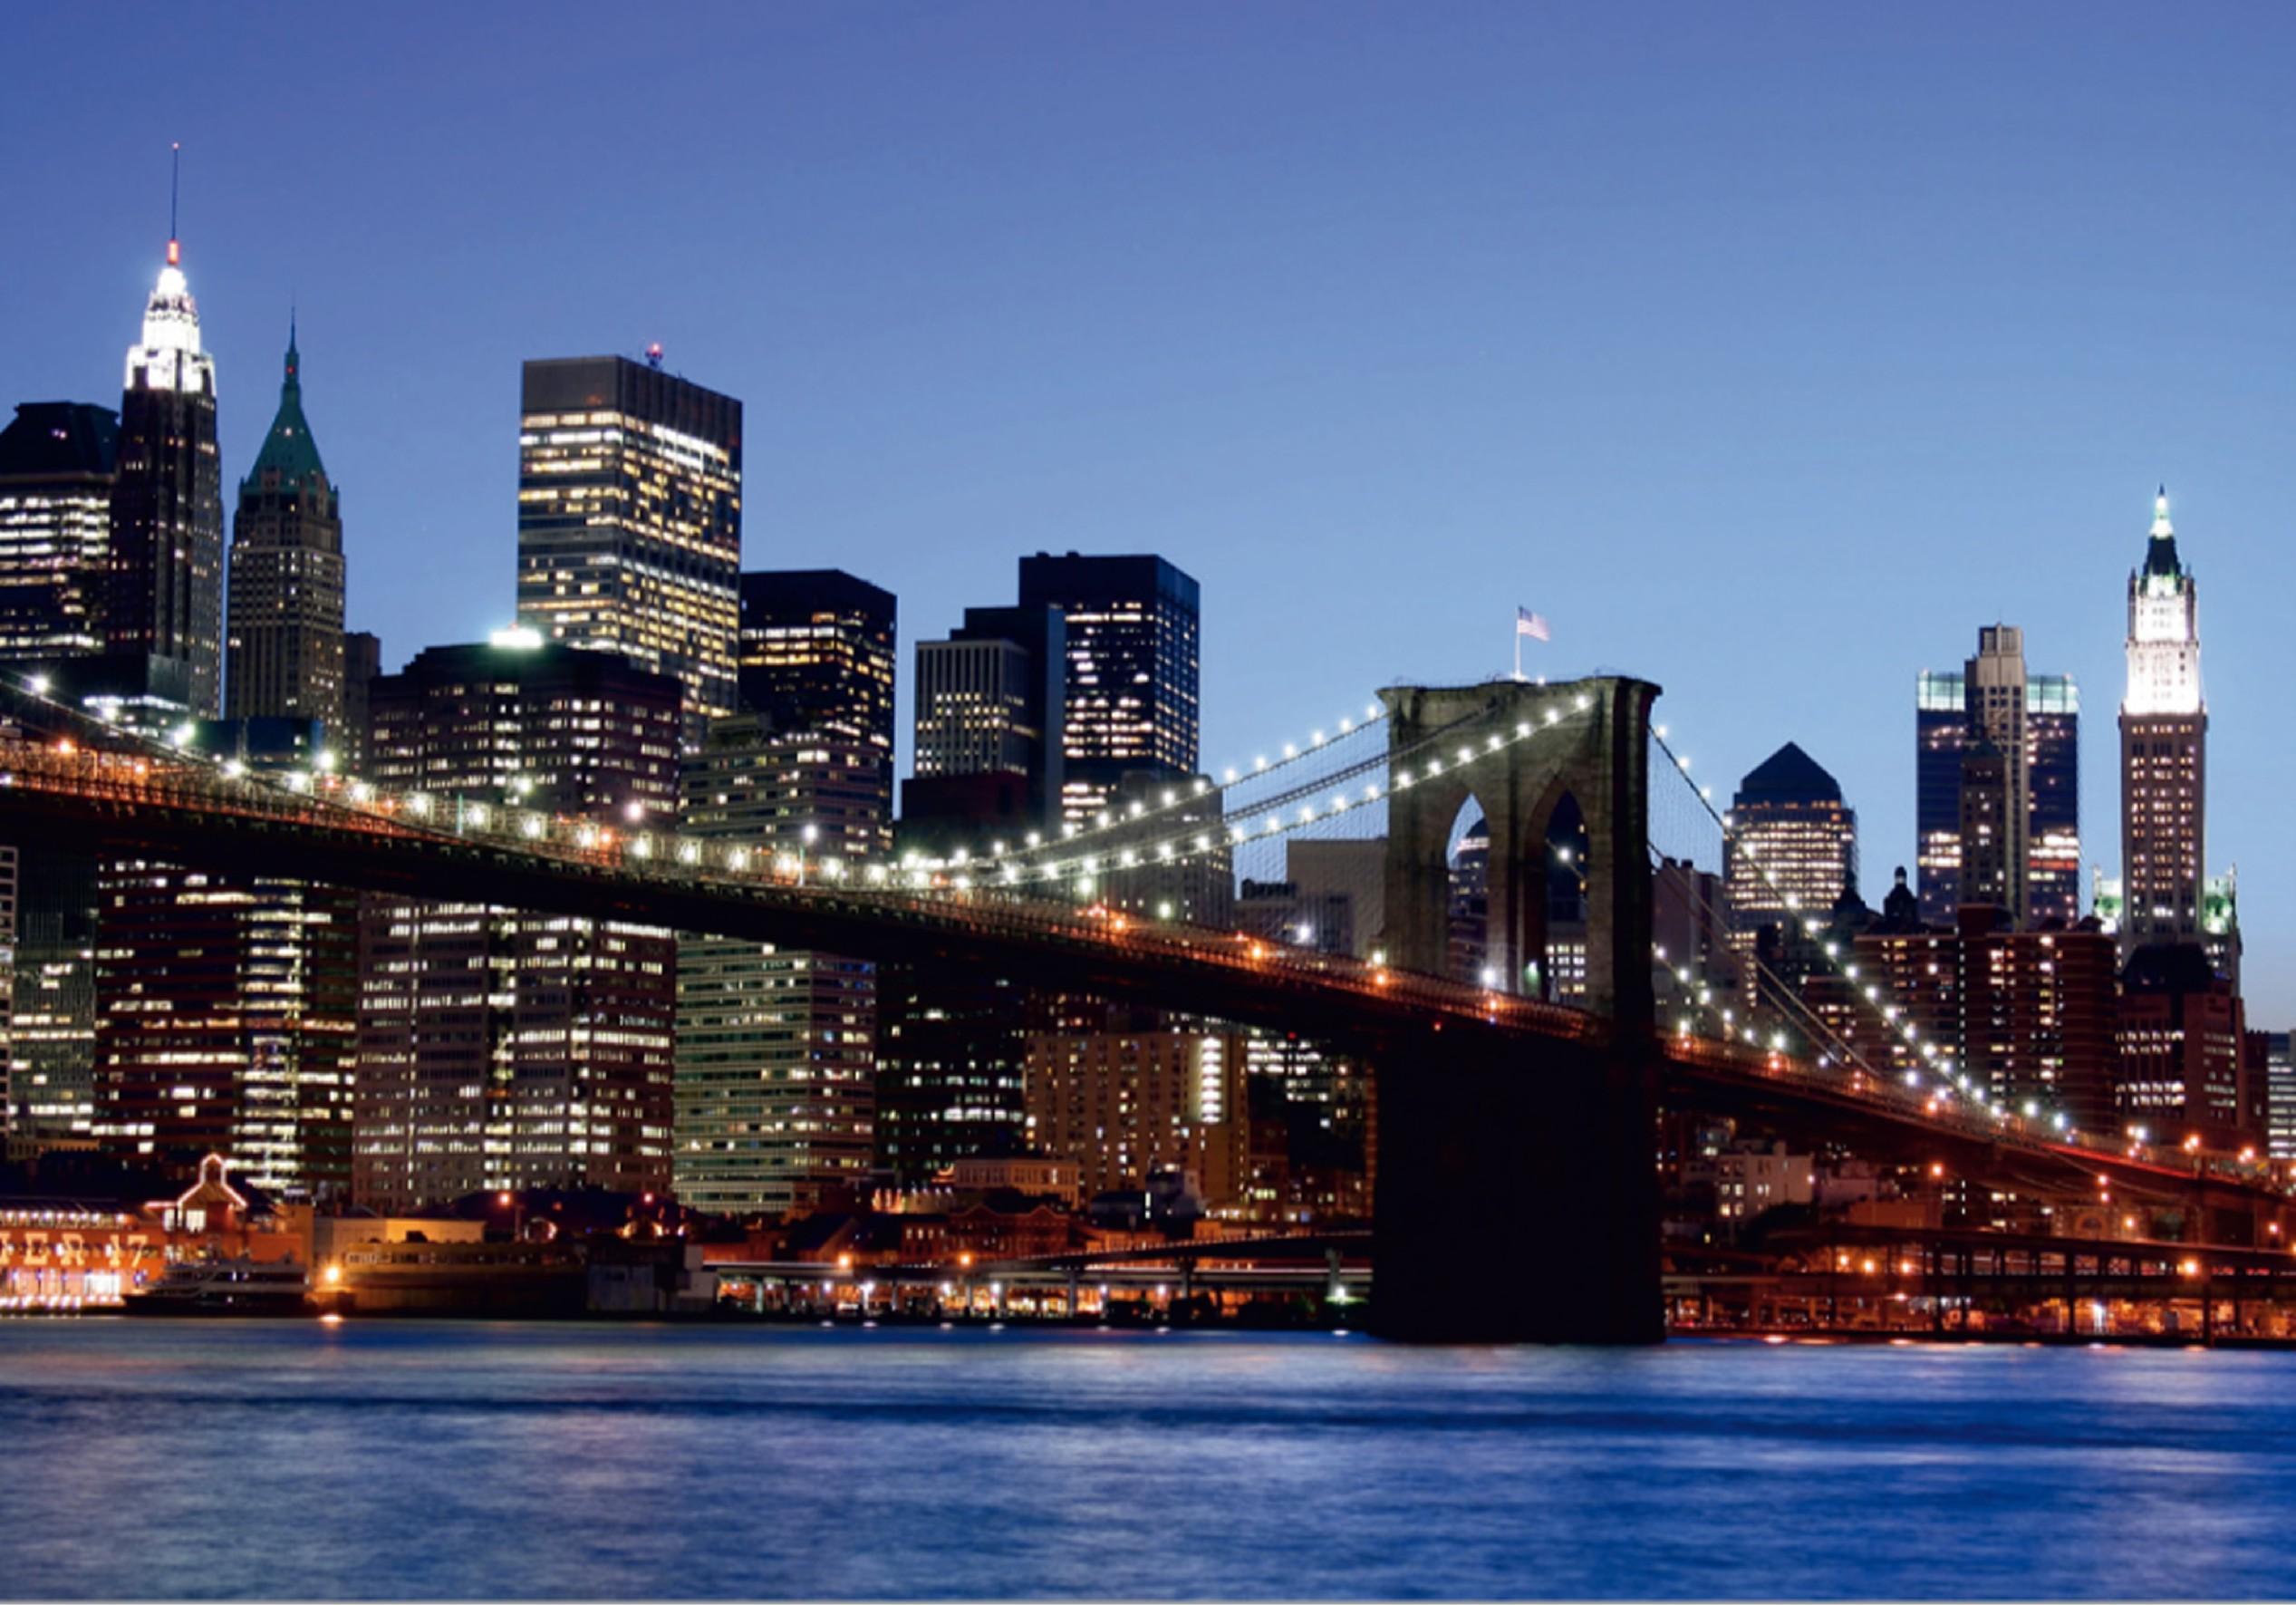 New York City Brooklyn Bridge At Night Wall Mural Non Woven Photo Wallpaper MADE In EUROPE For Living Room Family Room Bedroom, 11'10(H) X 8'10(V)